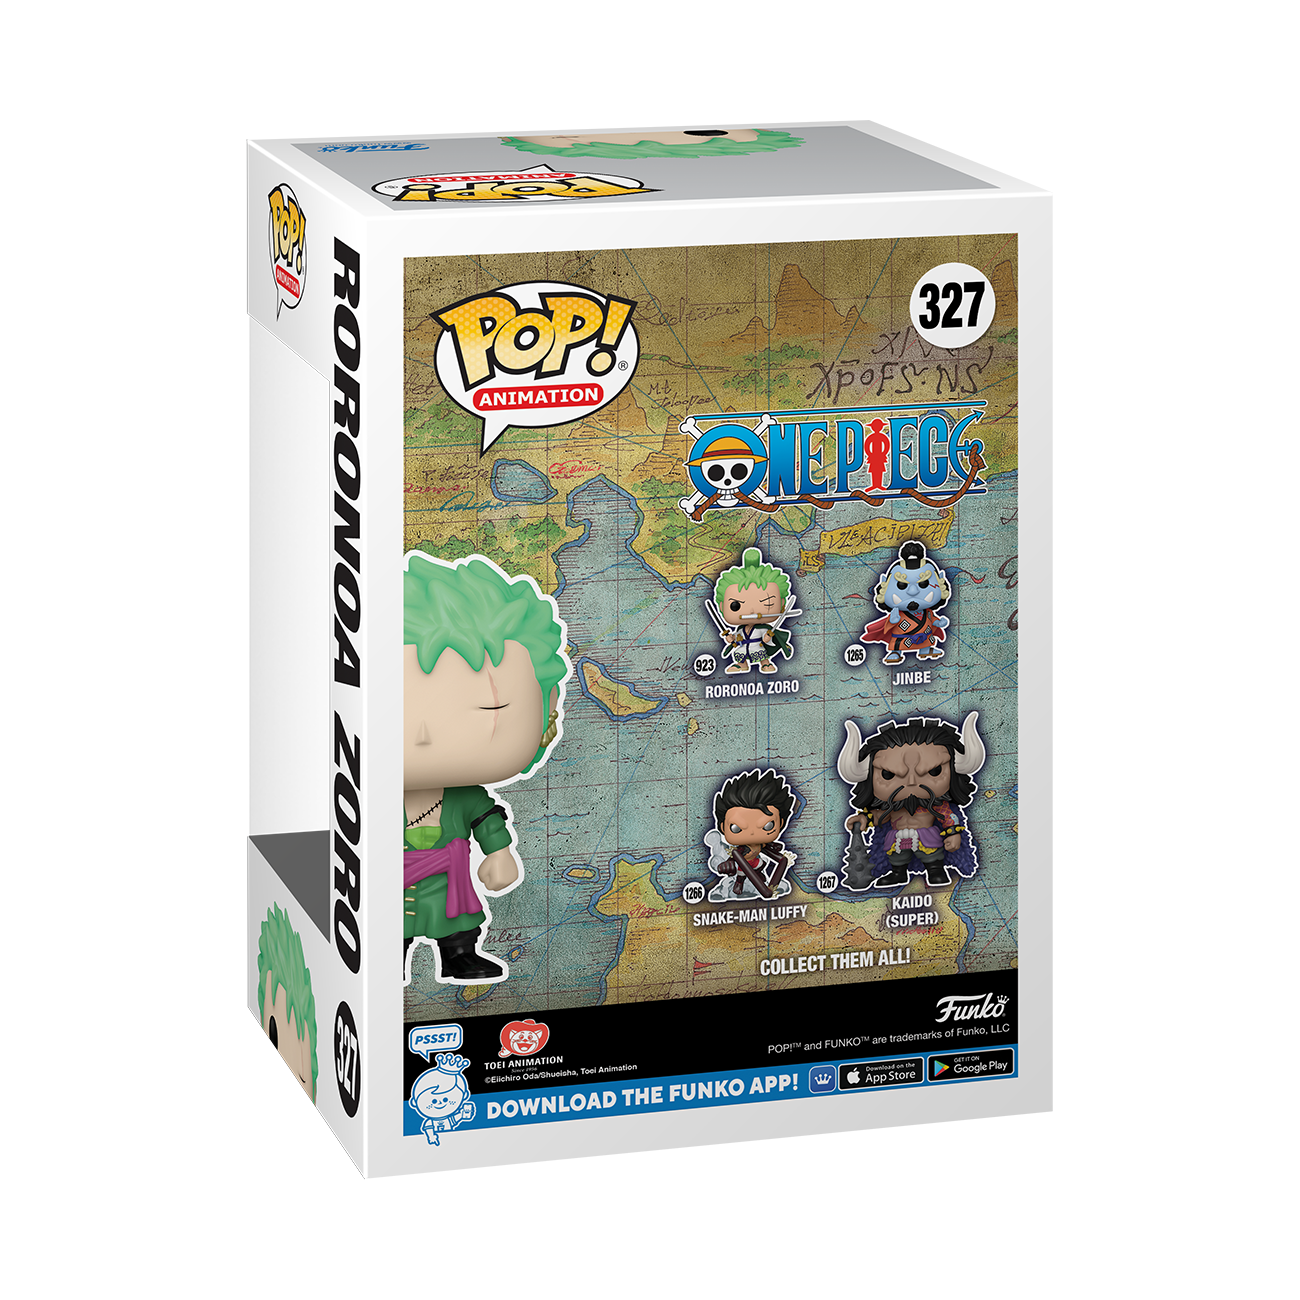 Link in Image Caption] One Piece Pop! Zoro (Enma) (Glow) now available at  Funko : r/funkopop